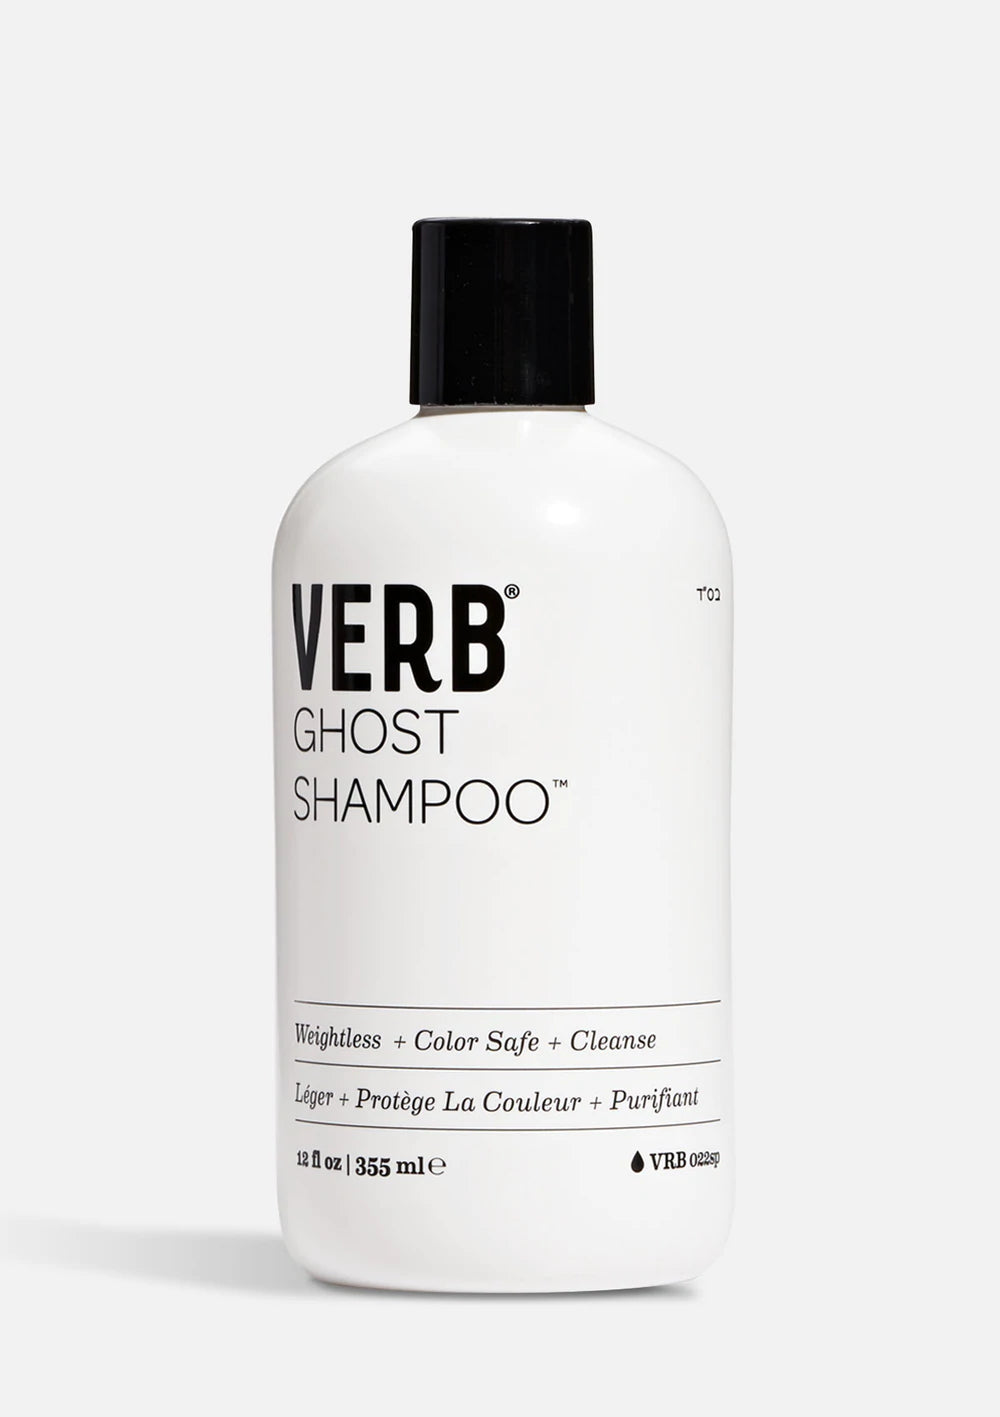 Verb Shampooing Ghost